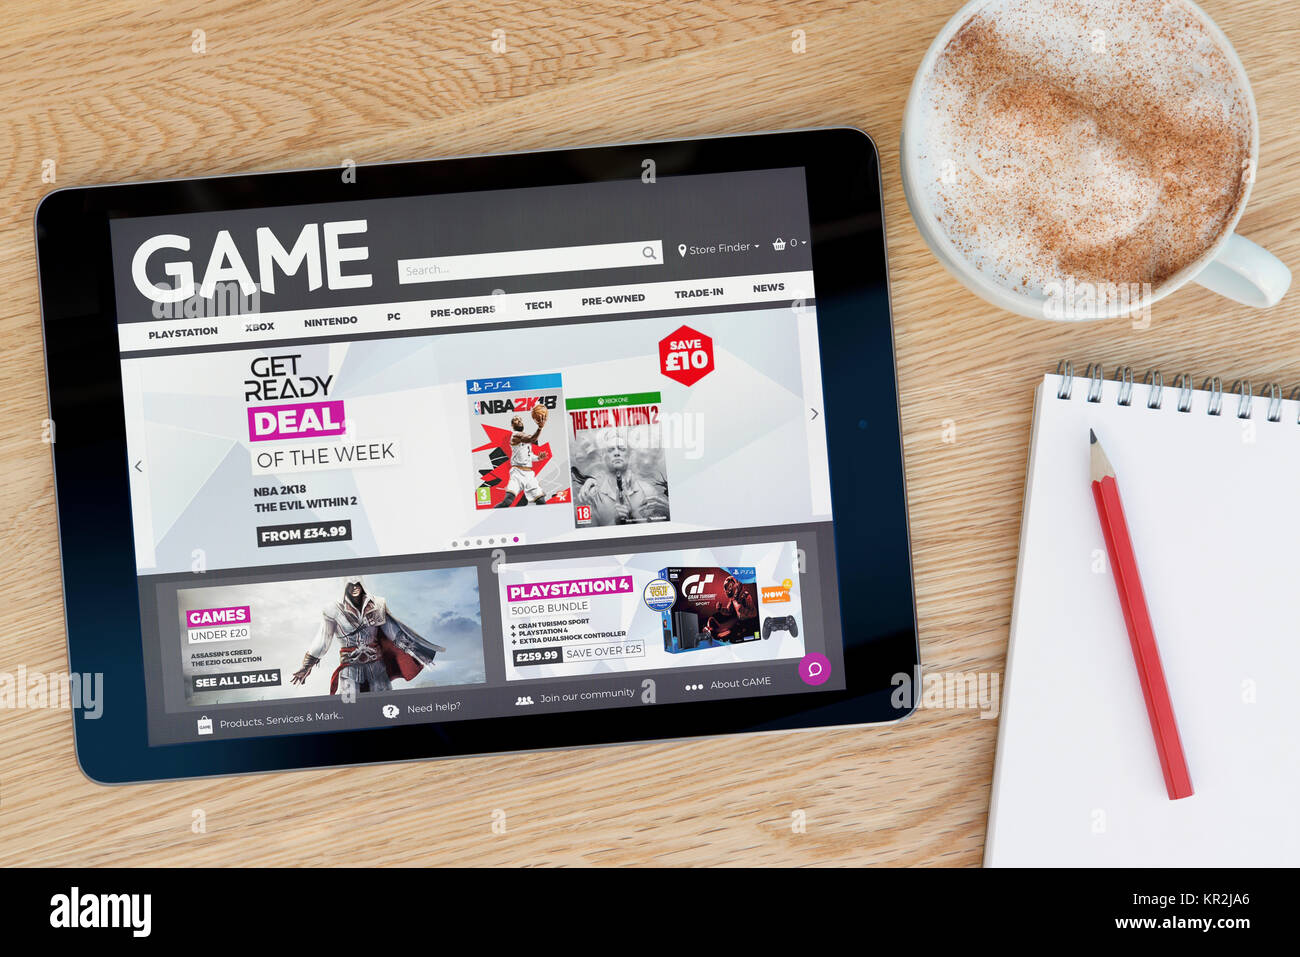 The Game retailer website on an iPad tablet device which rests on a wooden table beside a notepad and pencil and a cup of coffee (Editorial only) Stock Photo